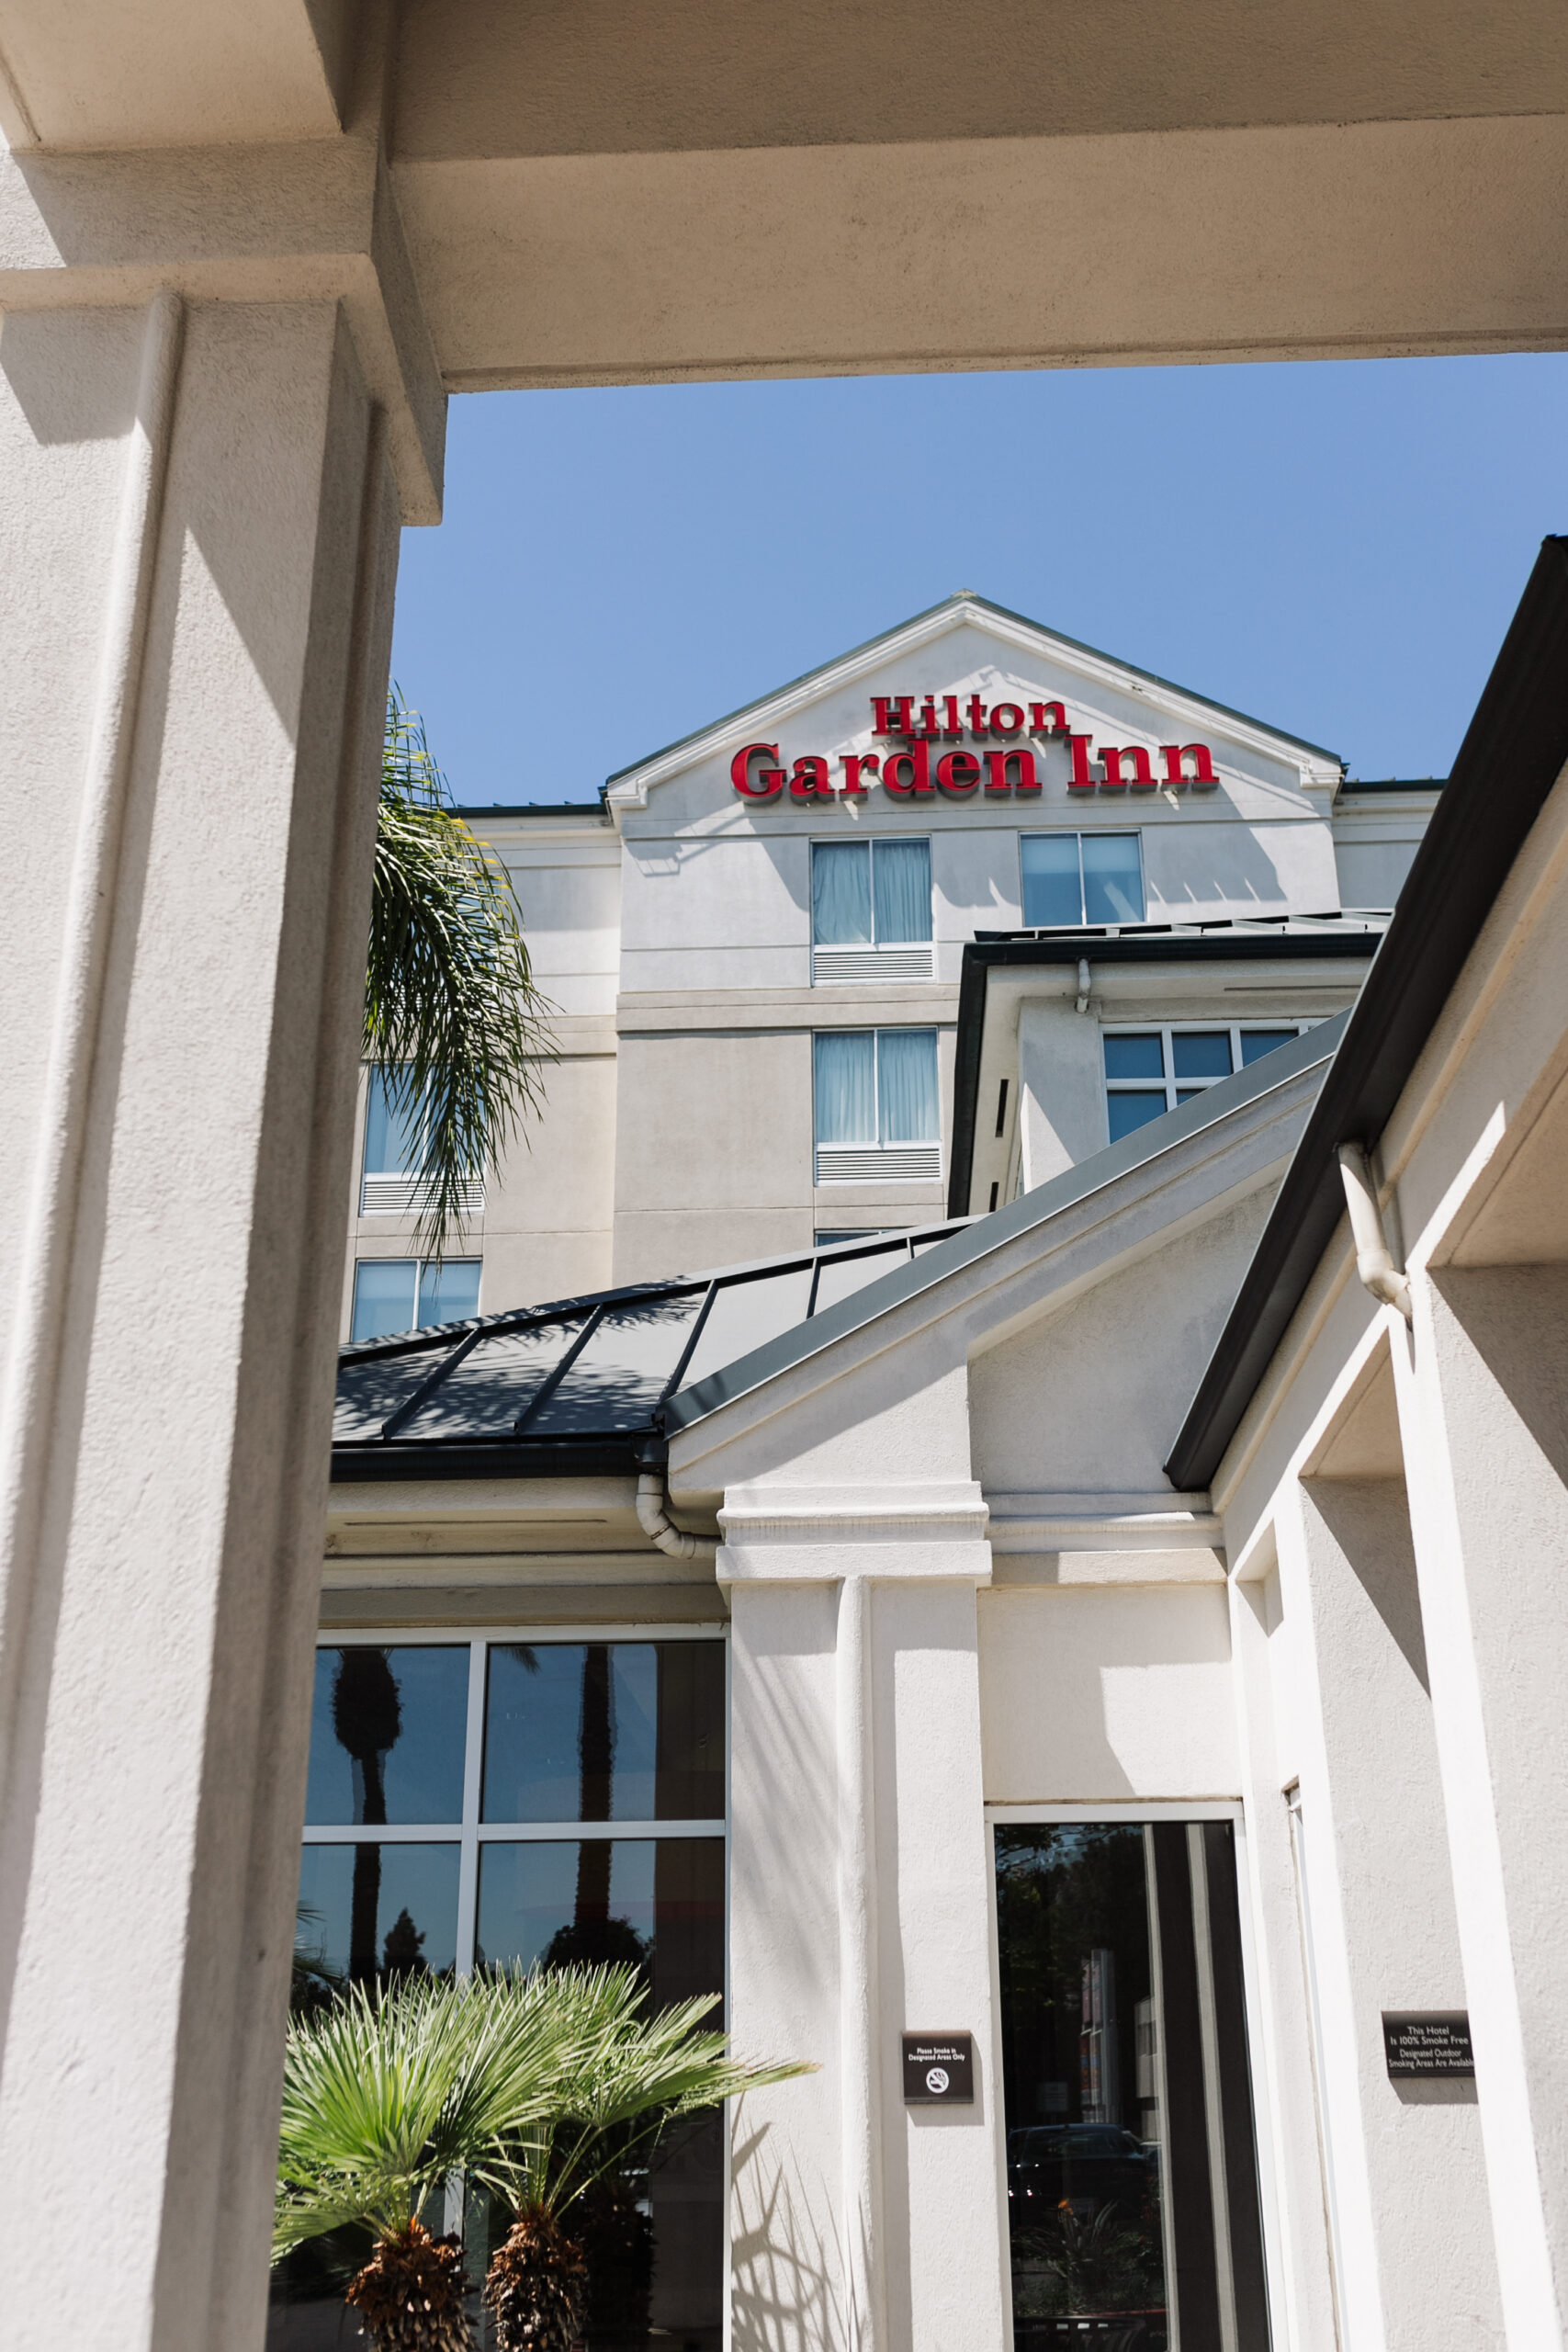 the Hilton Garden Inn is under a full renovation right now- coming soon!